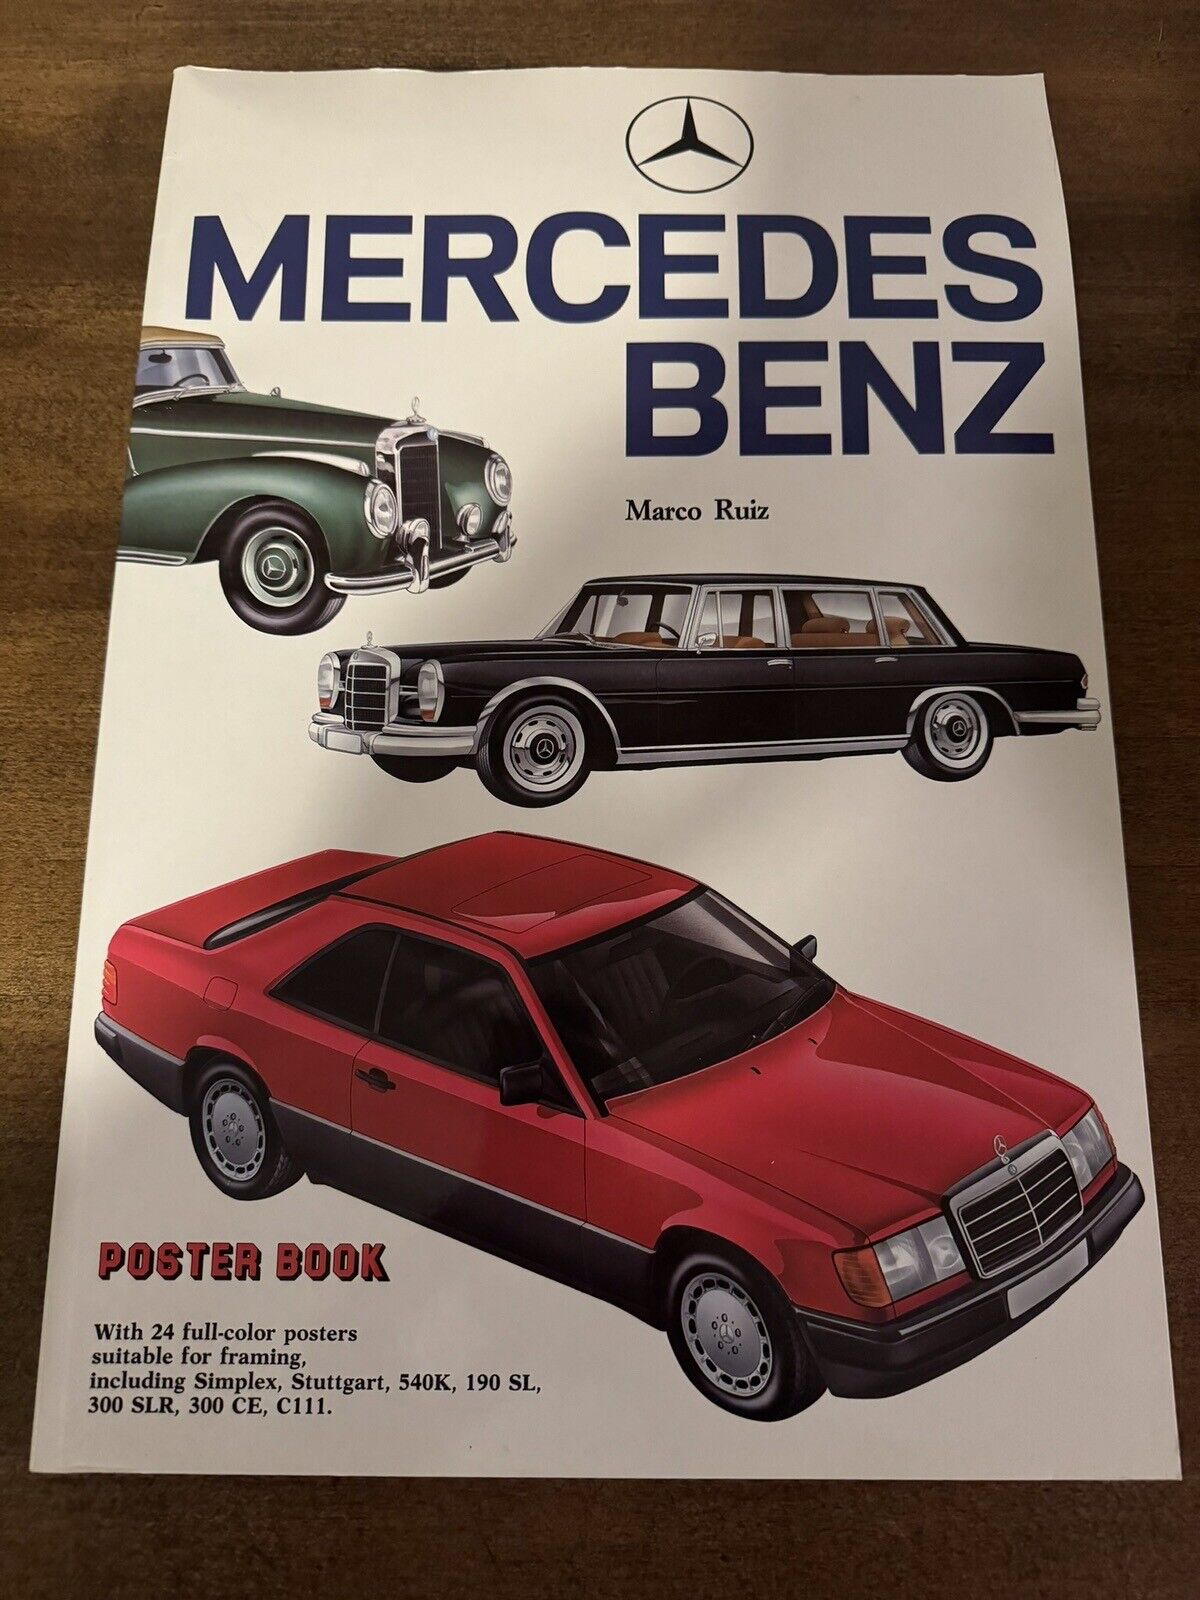 Mercedes Benz Poster Book by Marco Ruiz 24 Full-Color Frameable Posters